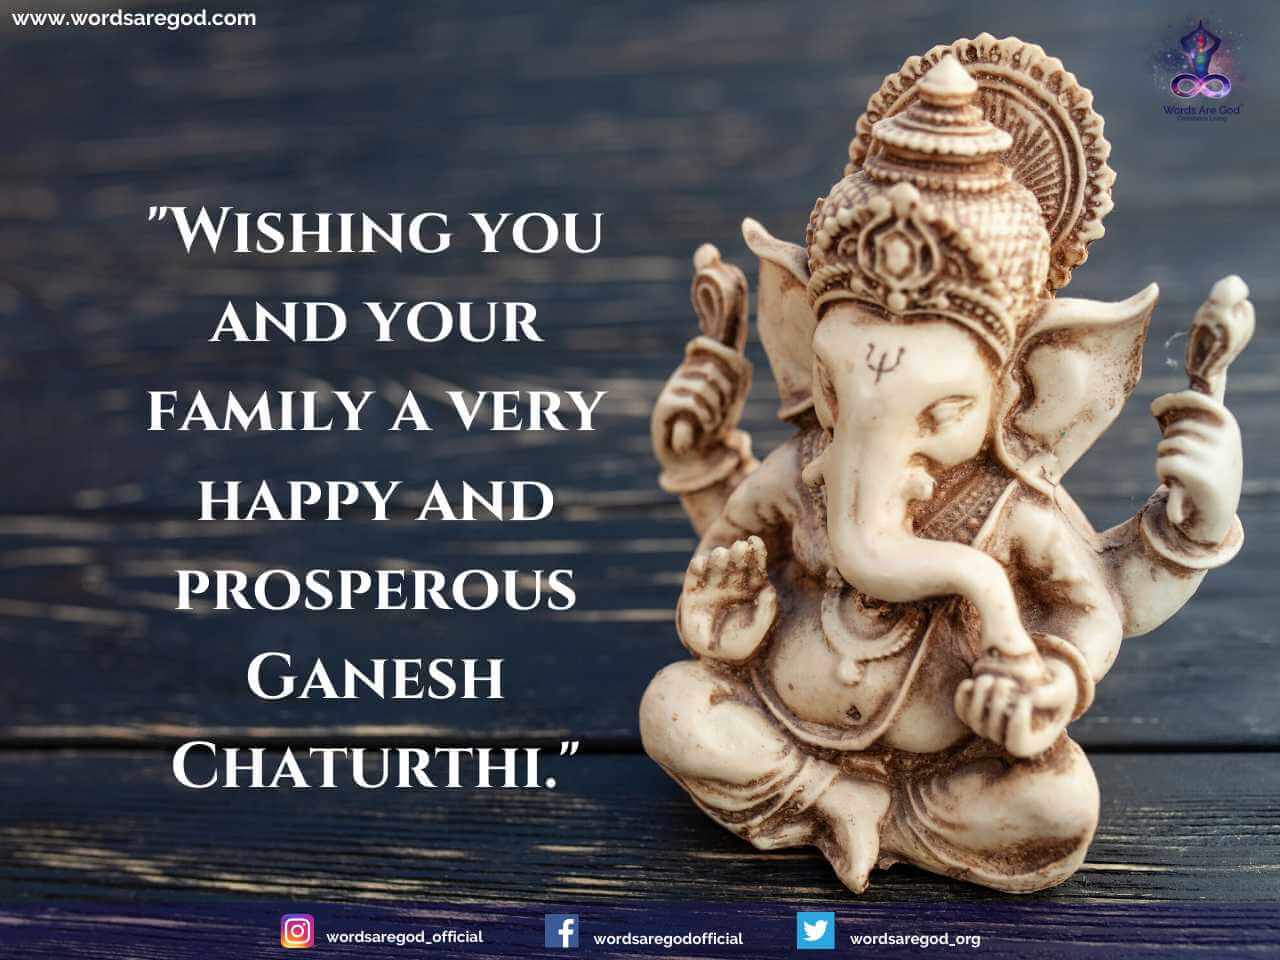 Wishing you and your family a Happy Ganesh Chaturthi